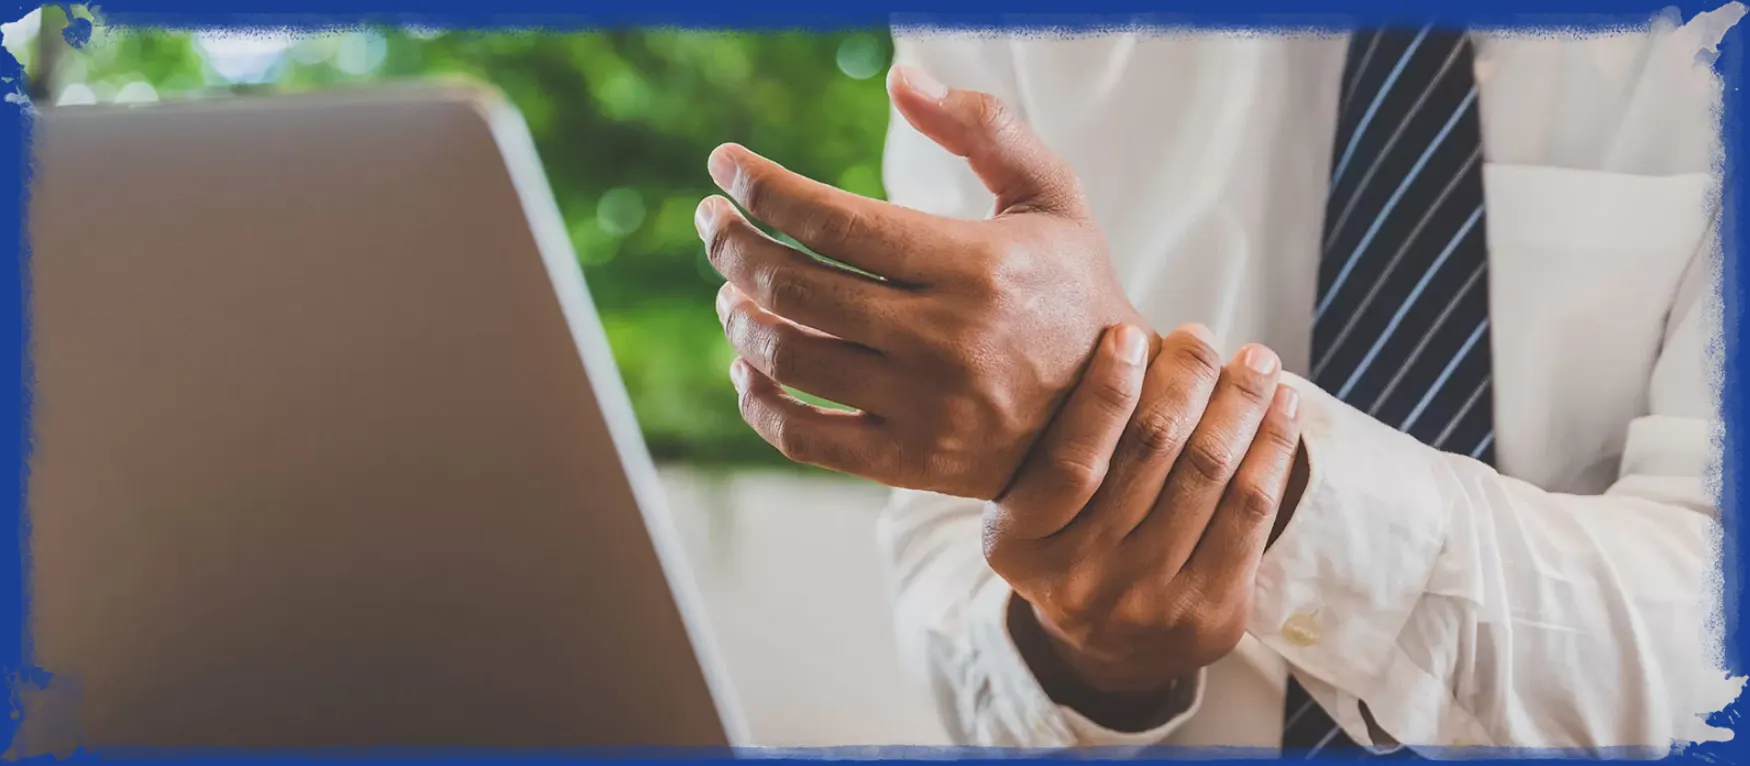 Carpal Tunnel Syndrome Treatment Chiropractor in Columbia, MO Near Me Chiropractor for Carpal Tunnel Syndrome